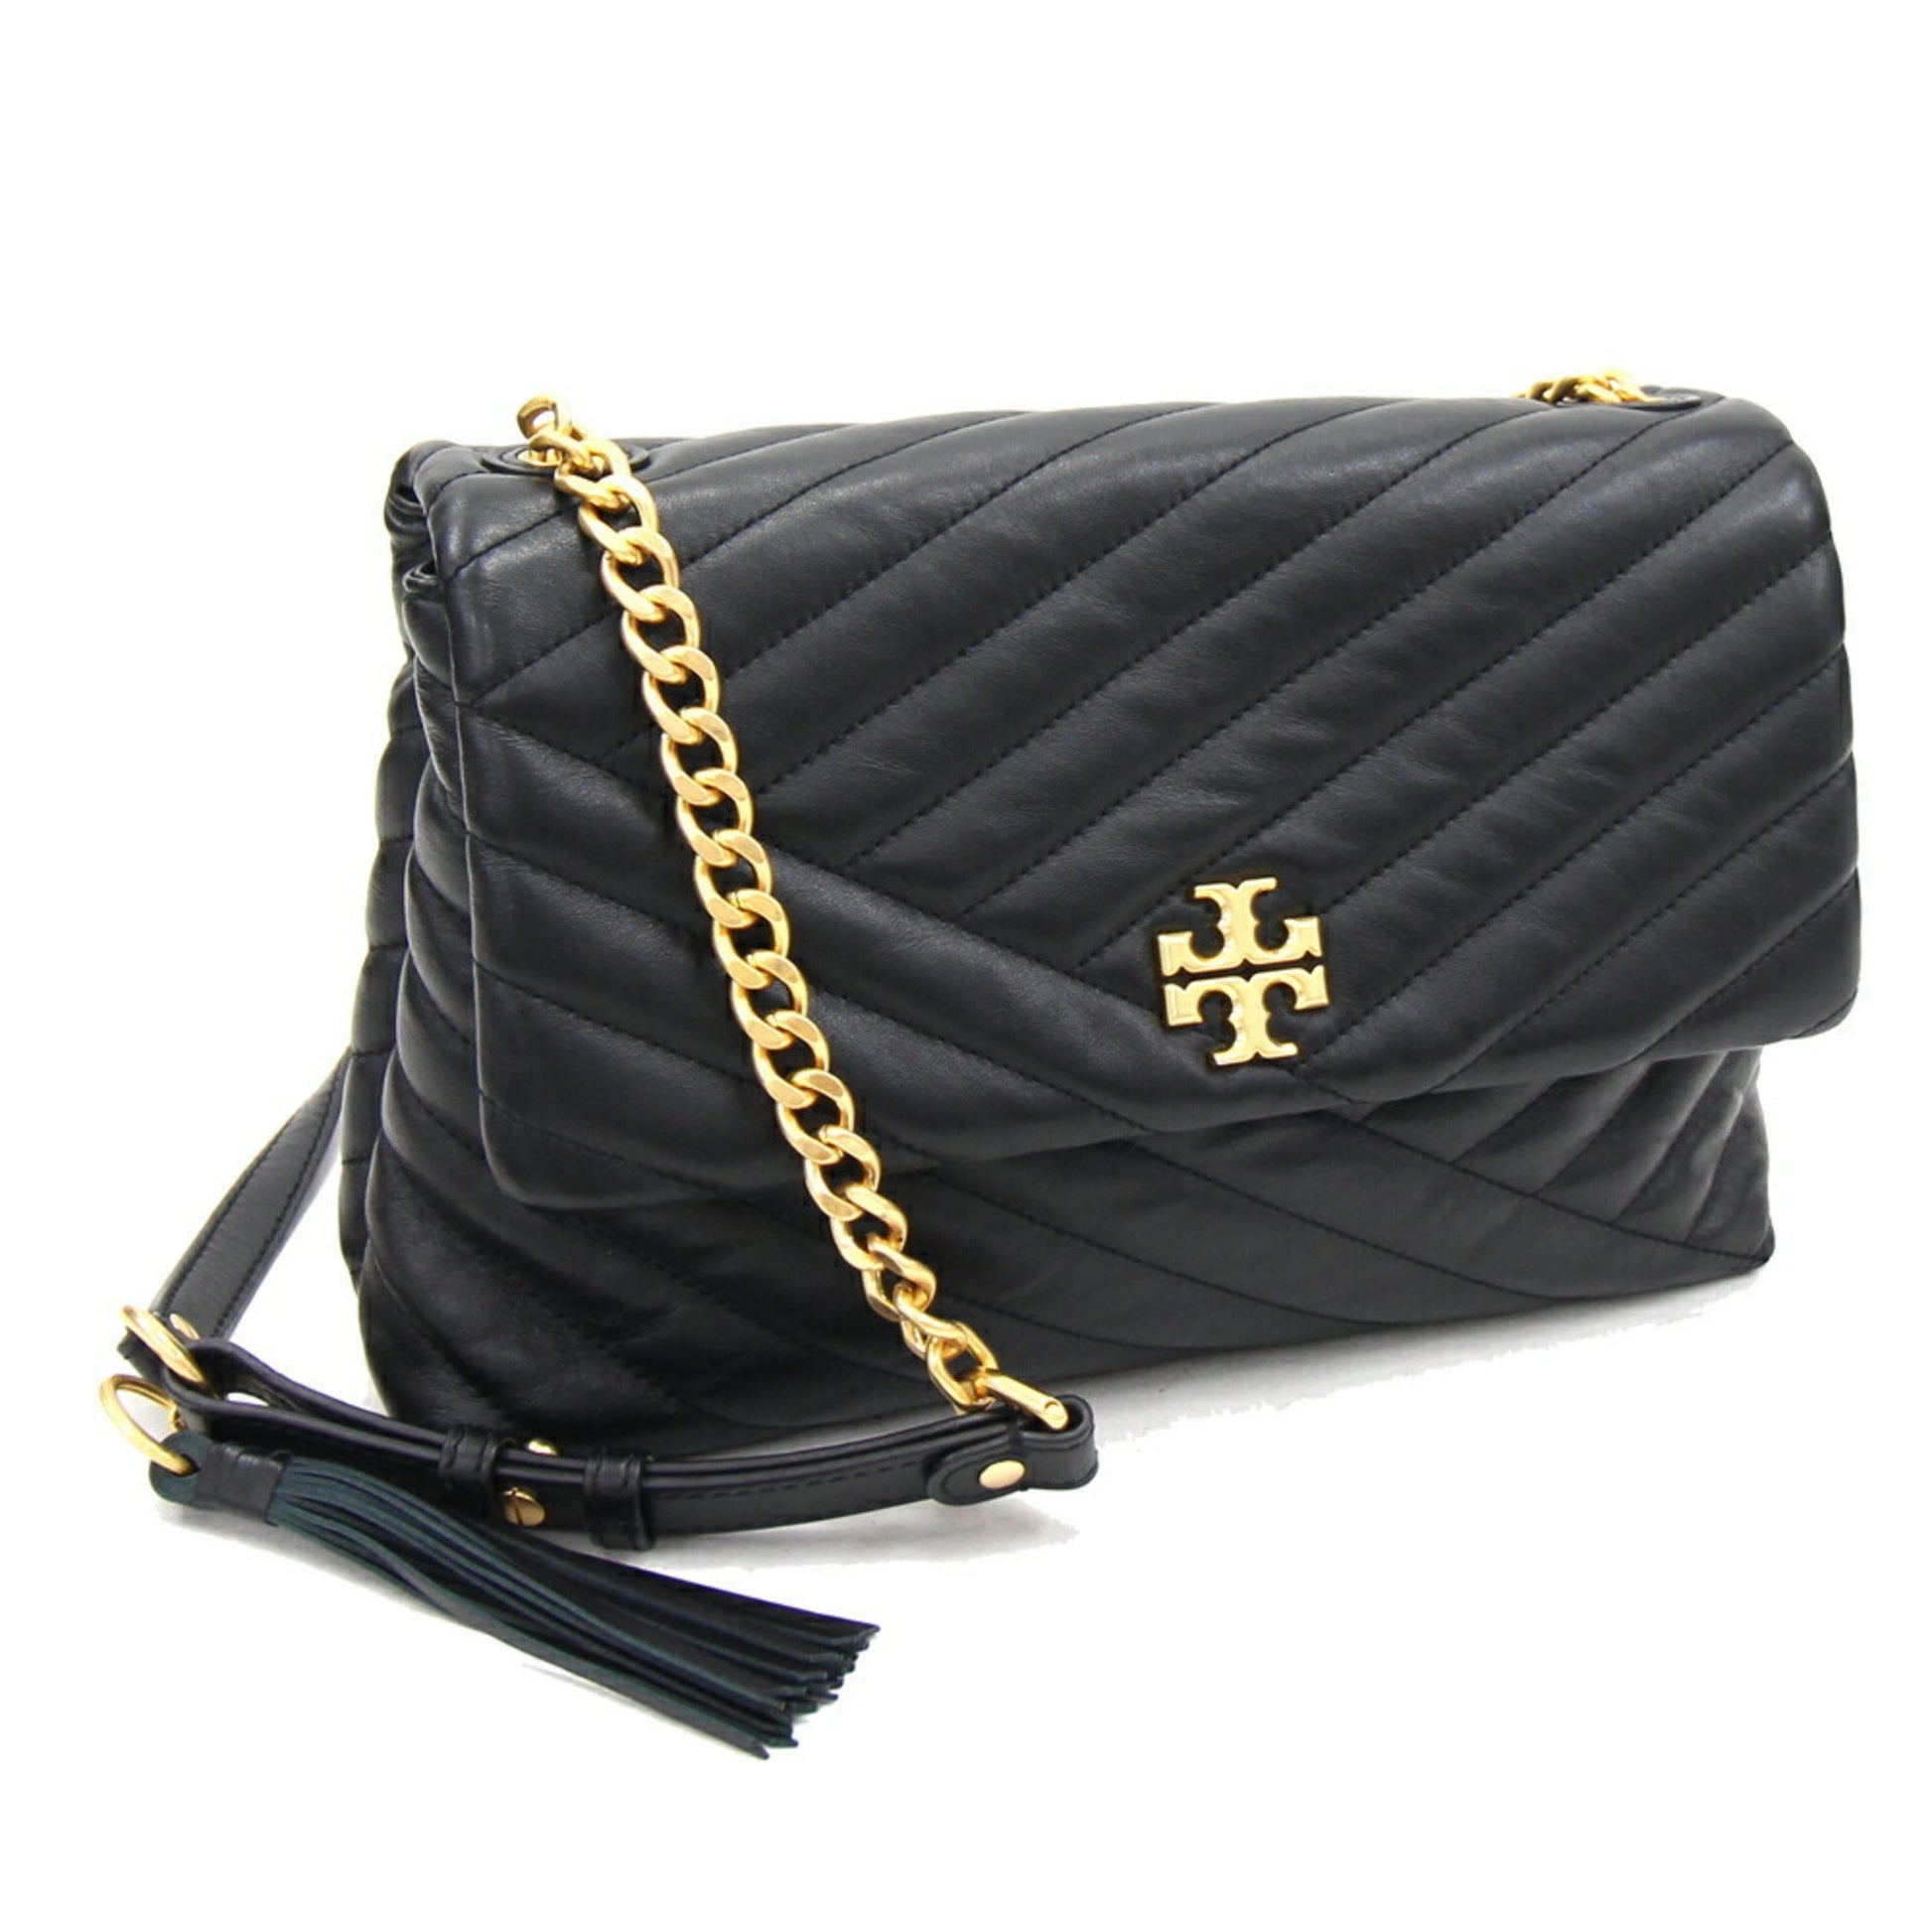 TORY BURCH Shoulder Bag Kira Chevron 58465 Black Leather Chain Quilted